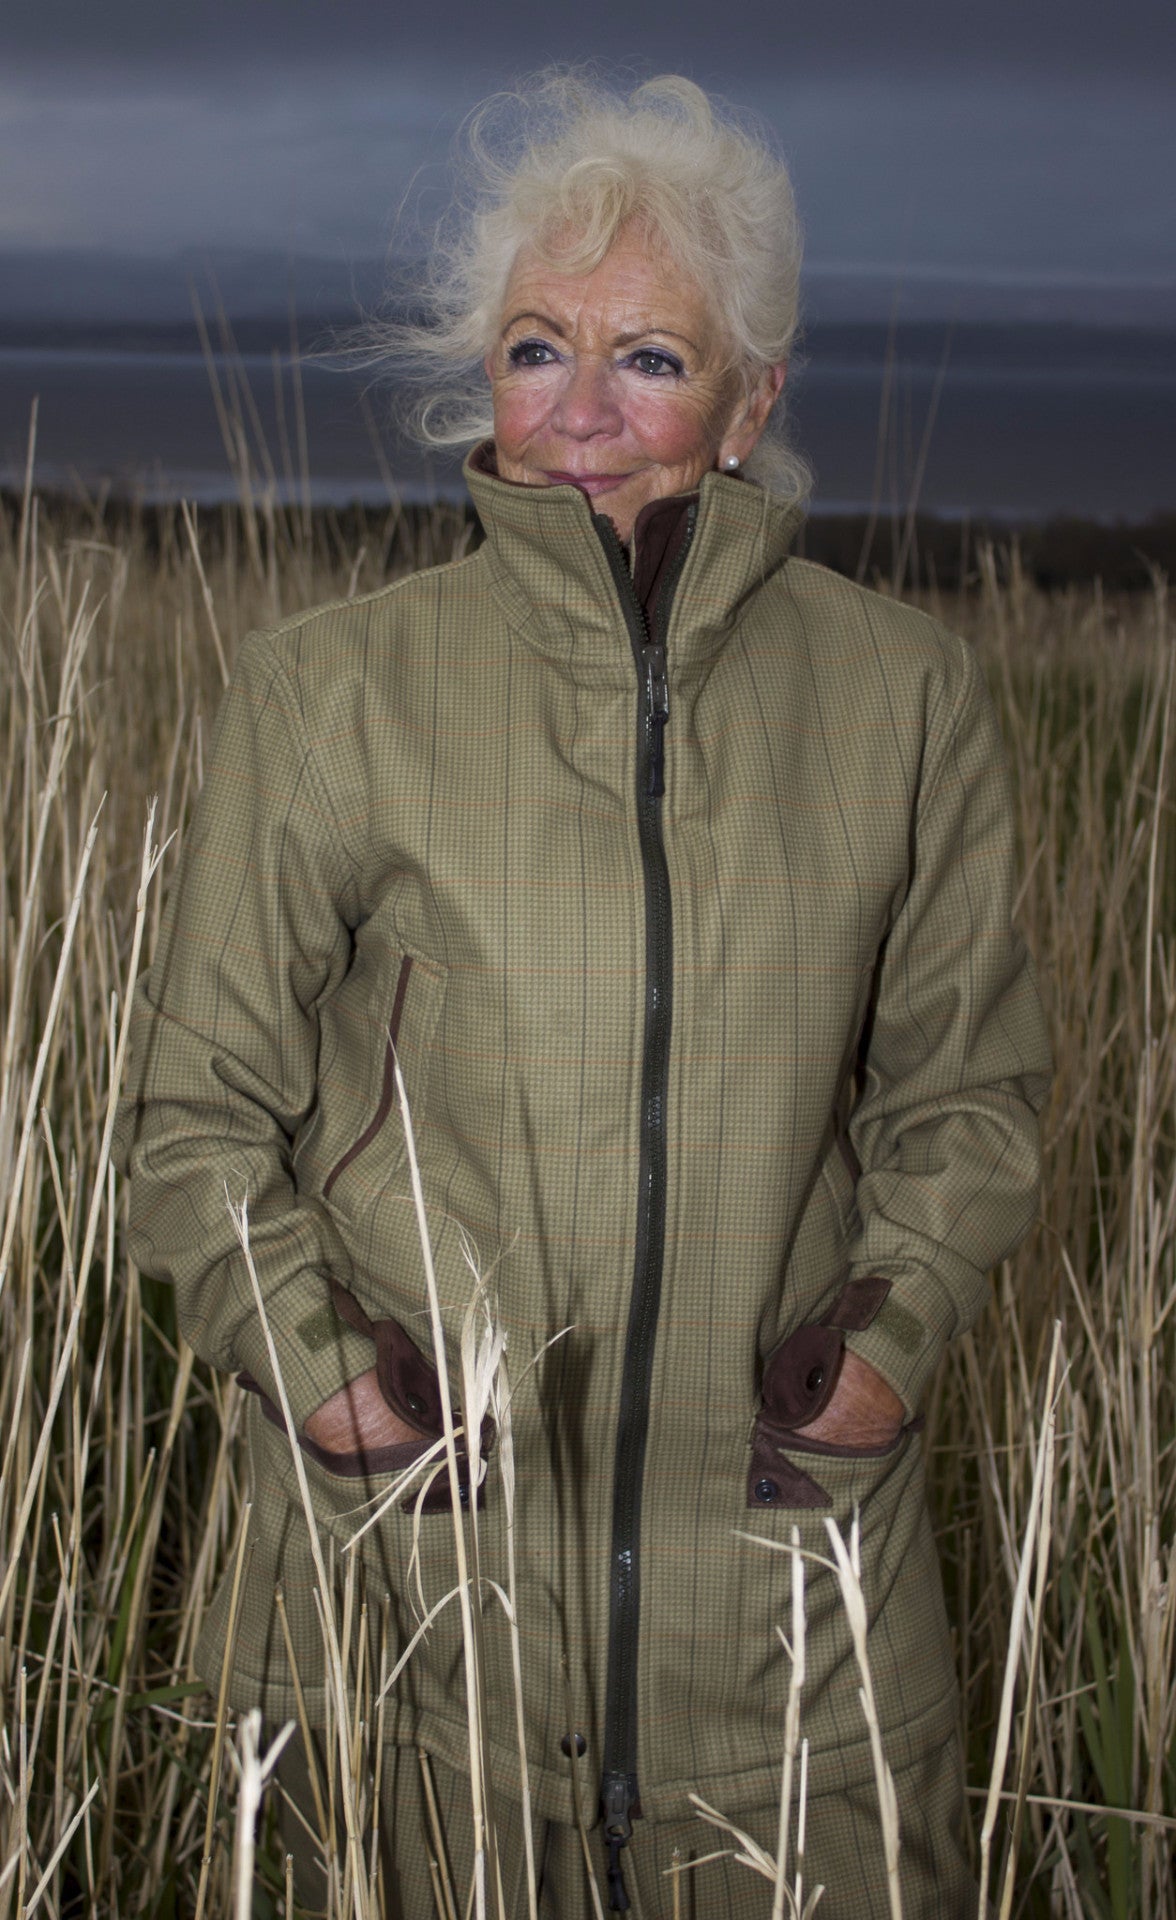 Lady Fitted Shooting Jacket